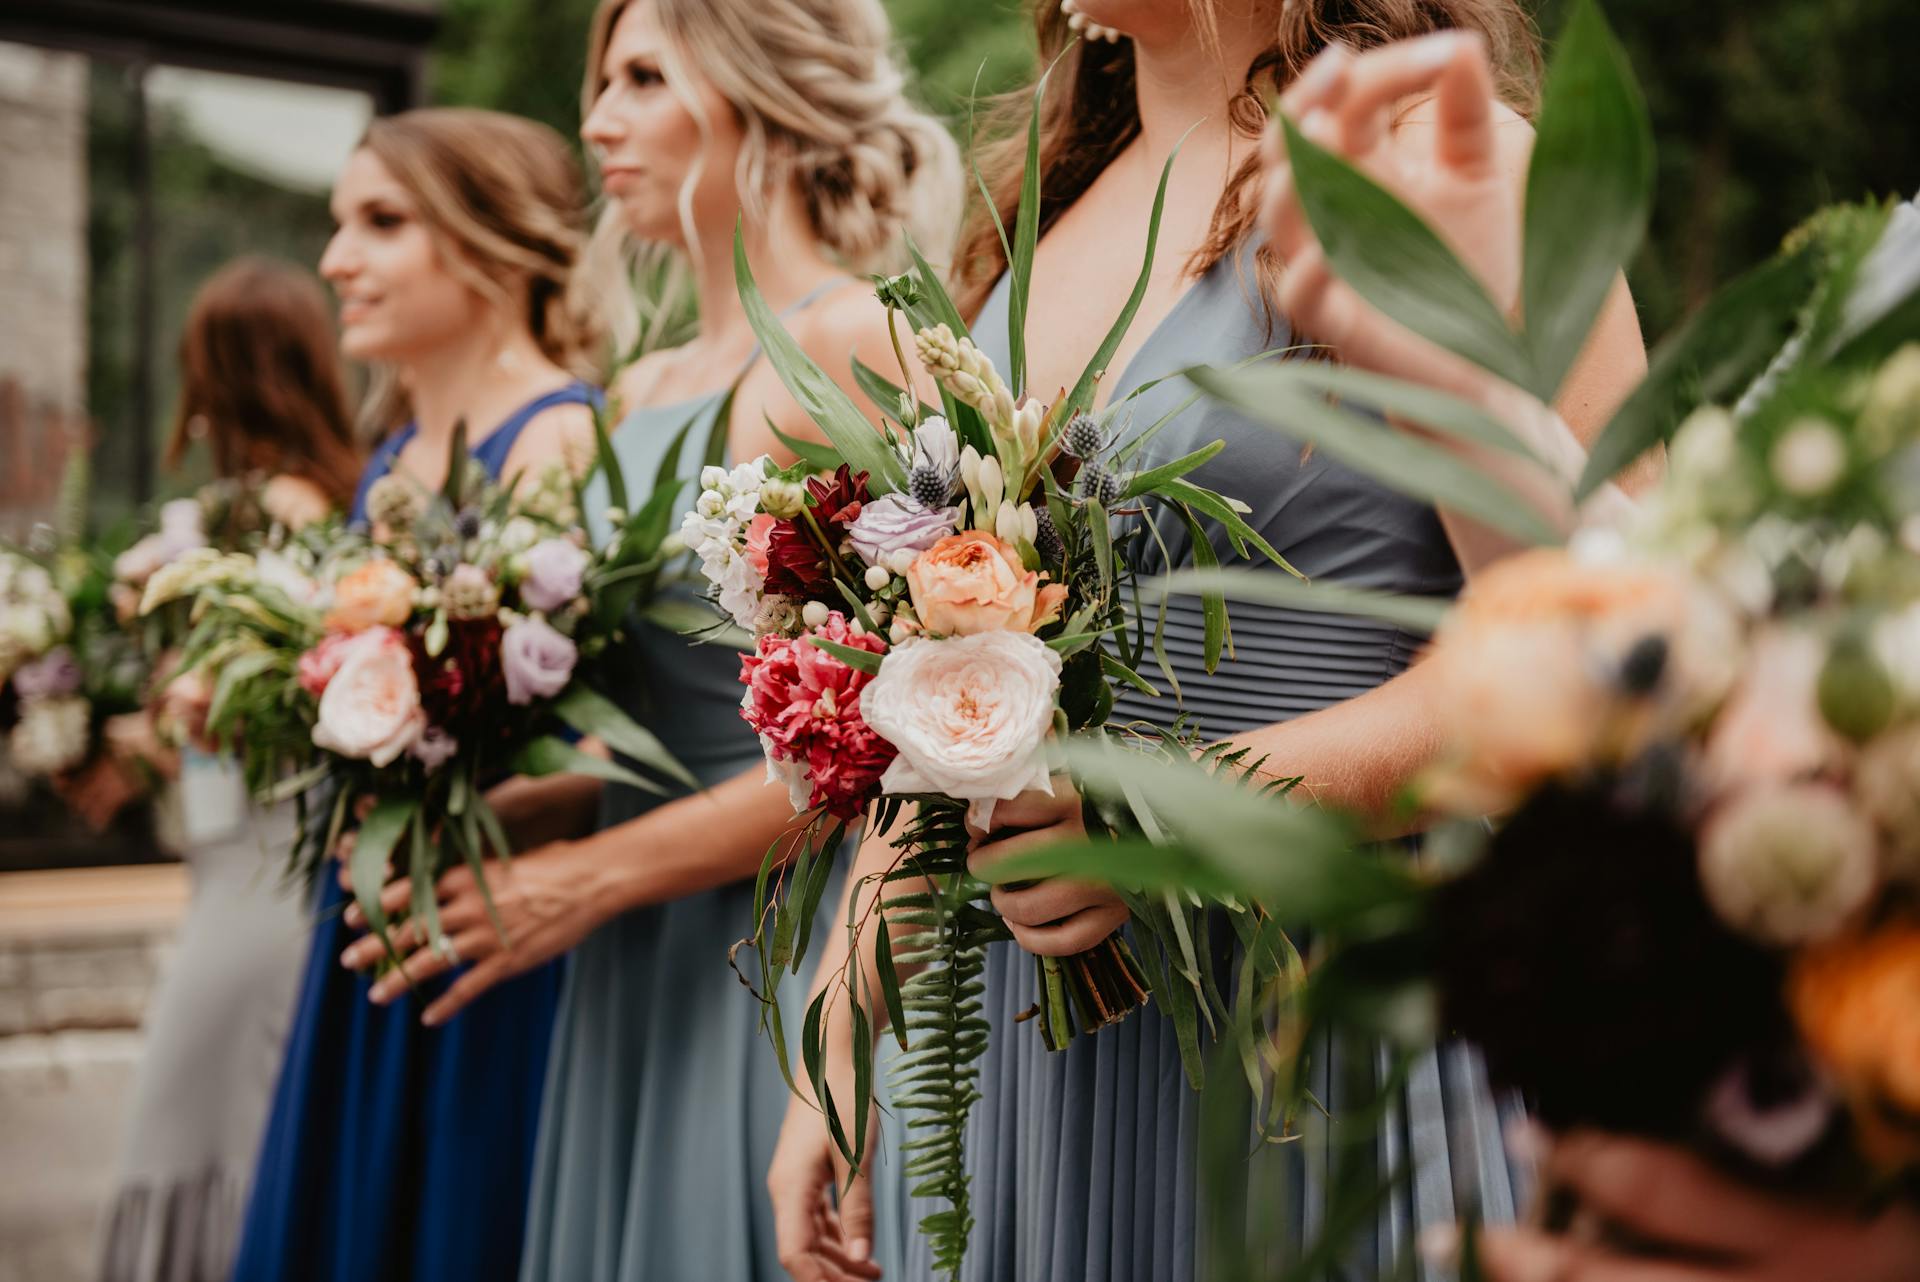 Bridesmaids holding flowers on wedding day | Source: Pexels